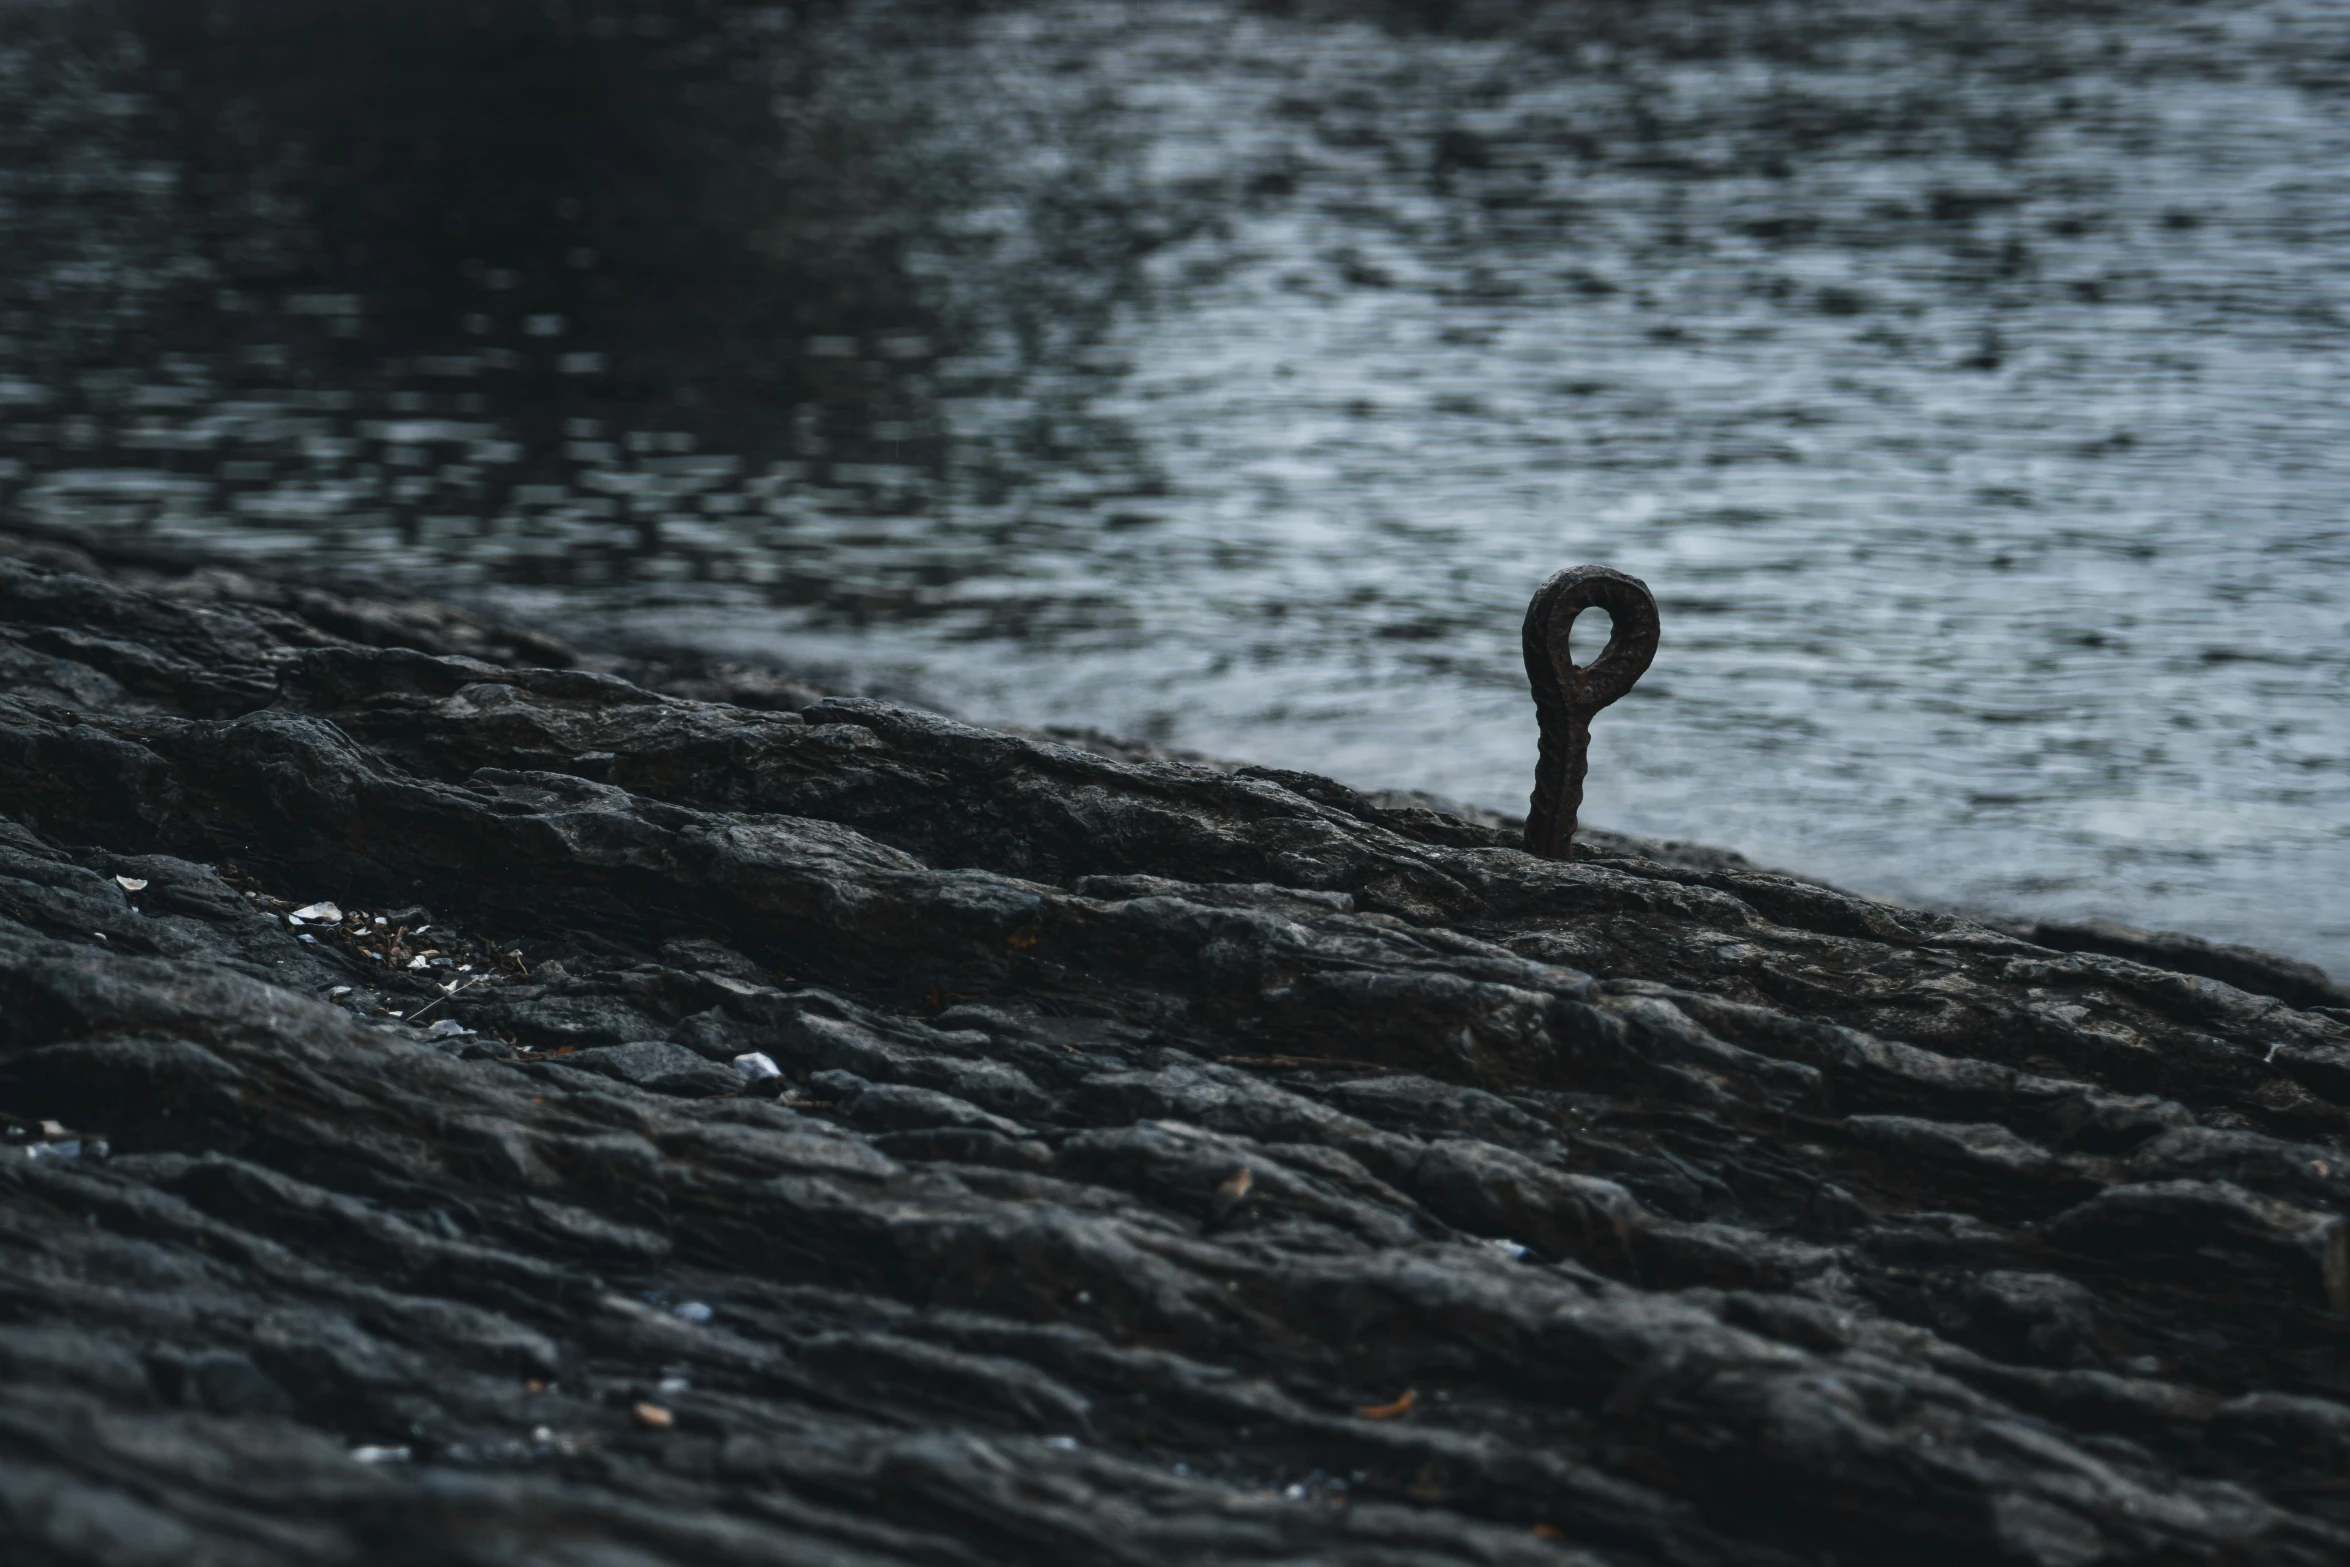 a circular object with a long chain sticking out from the water